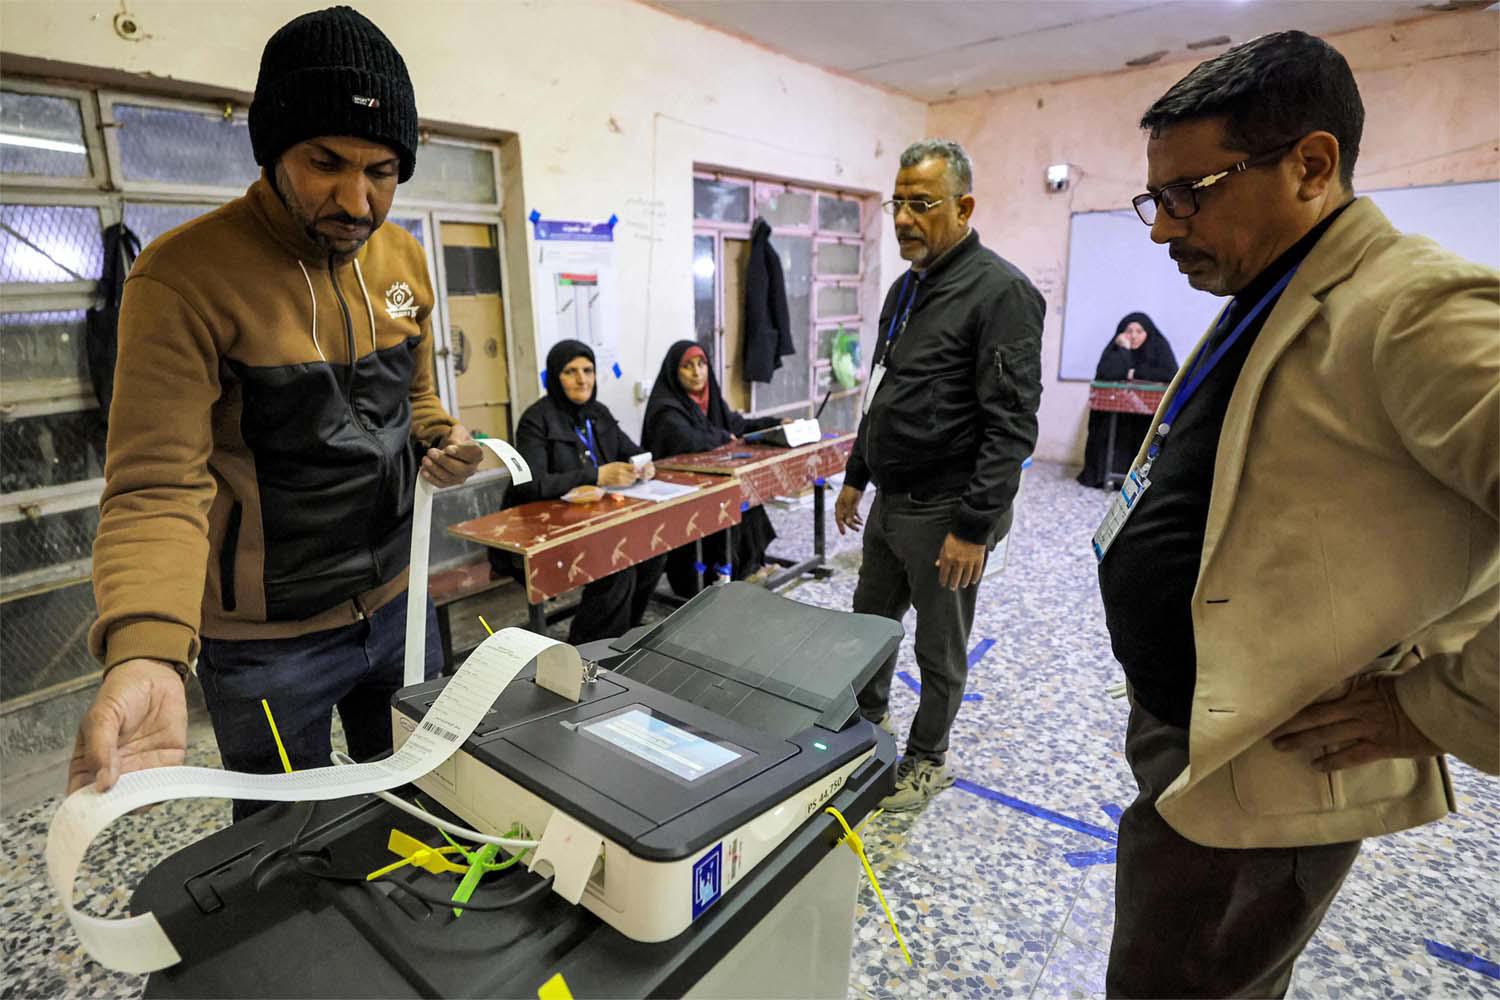 Voting took place on Monday in 15 of Iraq's 18 provinces to select 285 council members 